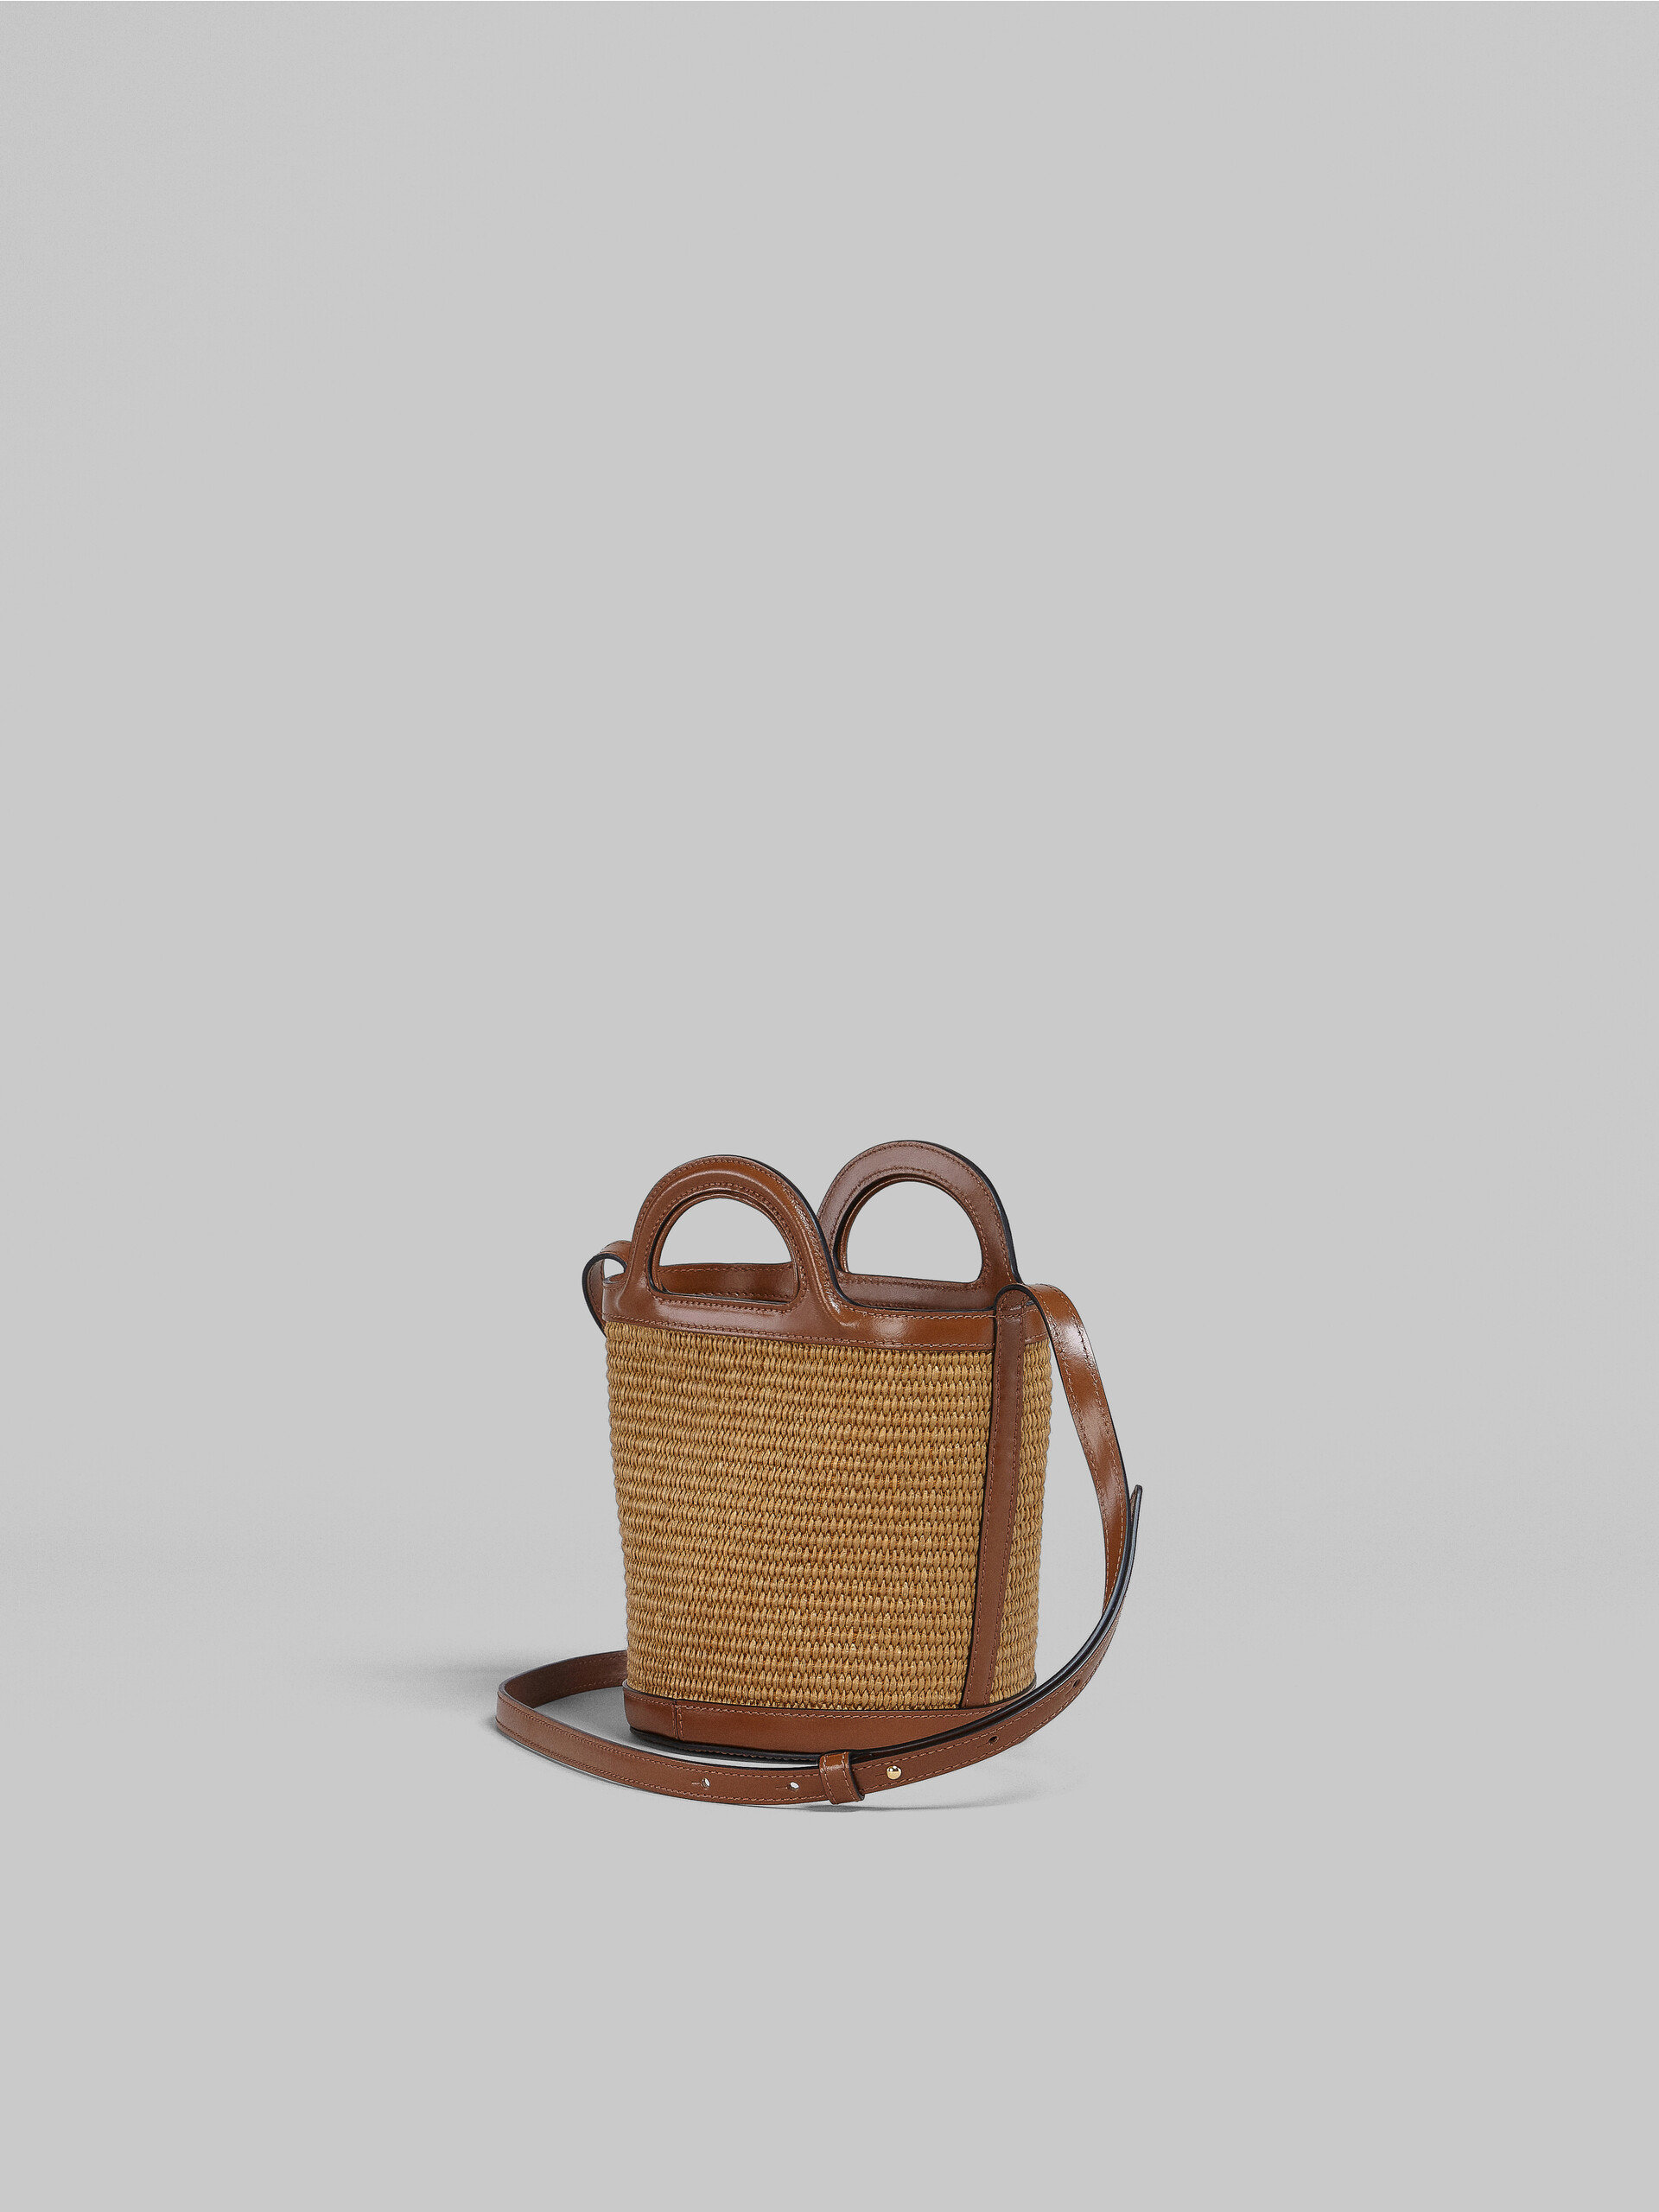 Tropicalia Small Bucket Bag in brown leather and raffia-effect fabric ...